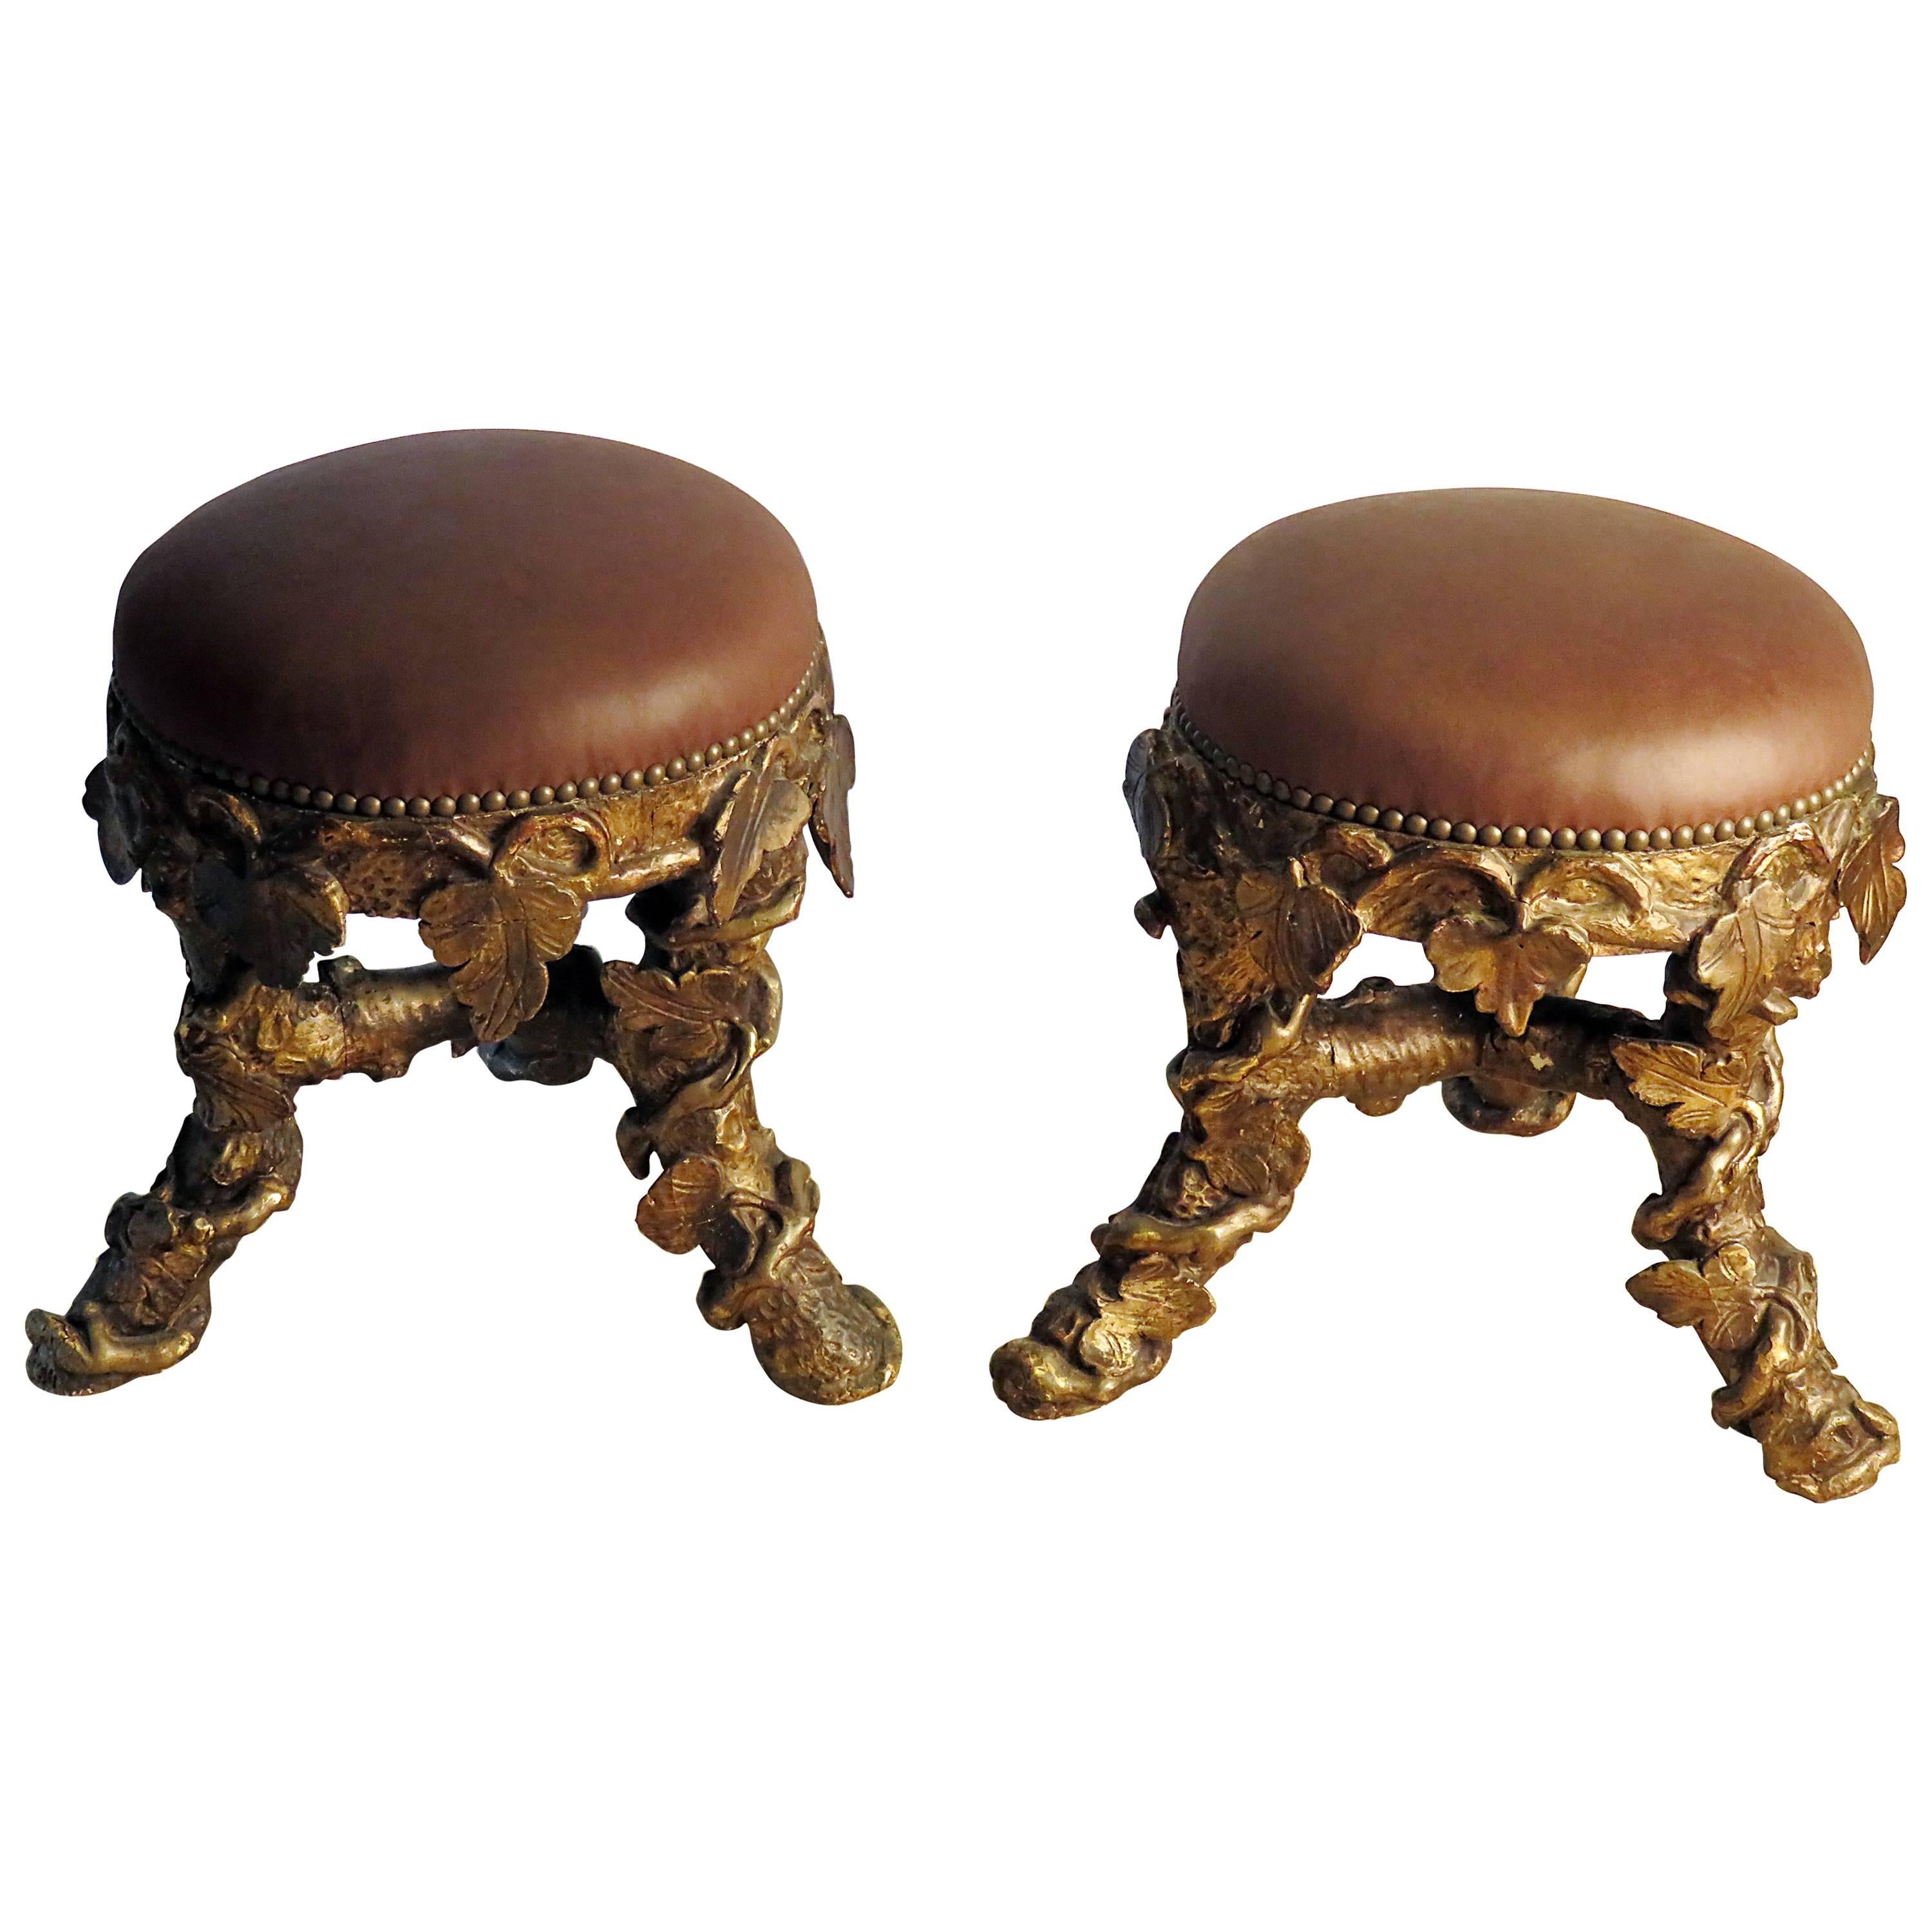 Pair of Italian Giltwood Grotto Stools Upholstered in Leather, circa 1870